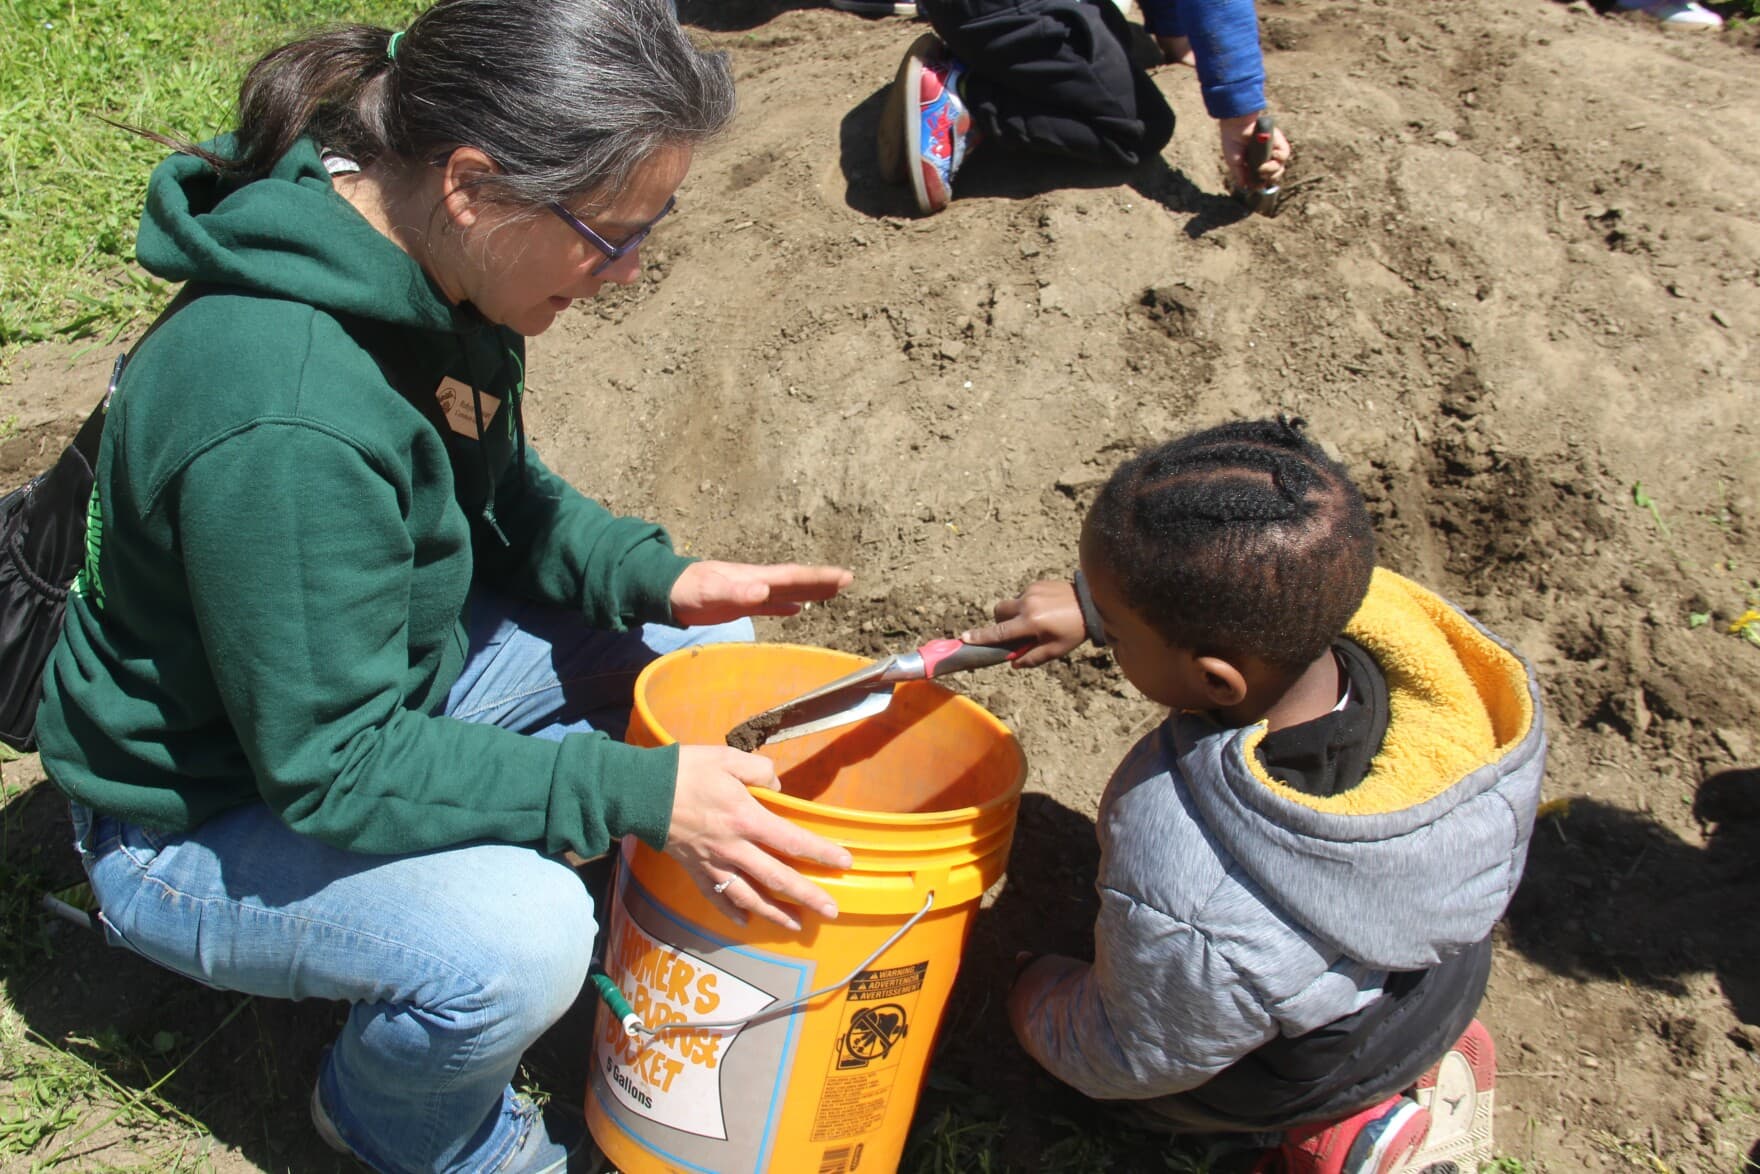 Common Ground’s Schoolyard Manager Robyn Stewart assists a young student in scooping soil at John S. Martinez magnet school in New Haven, Connecticut. (Megan Briggs/WSHU)